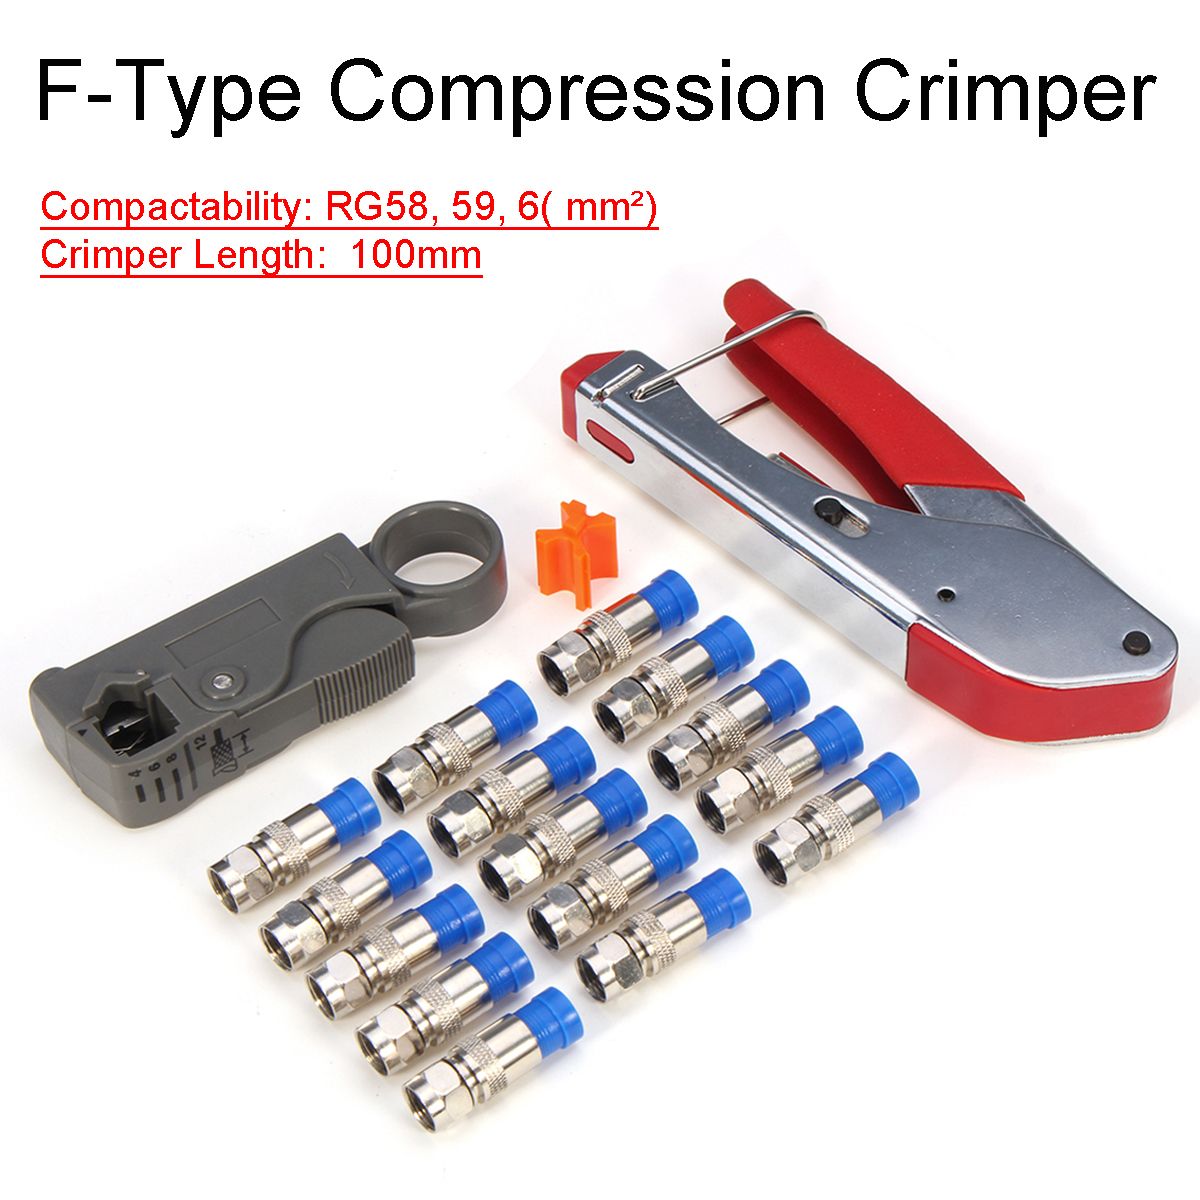 F-Type-Compression-Crimper-Hand-Tool-Rotary-Coaxial-Cable-Cutter-Crimp-Connector-1263027